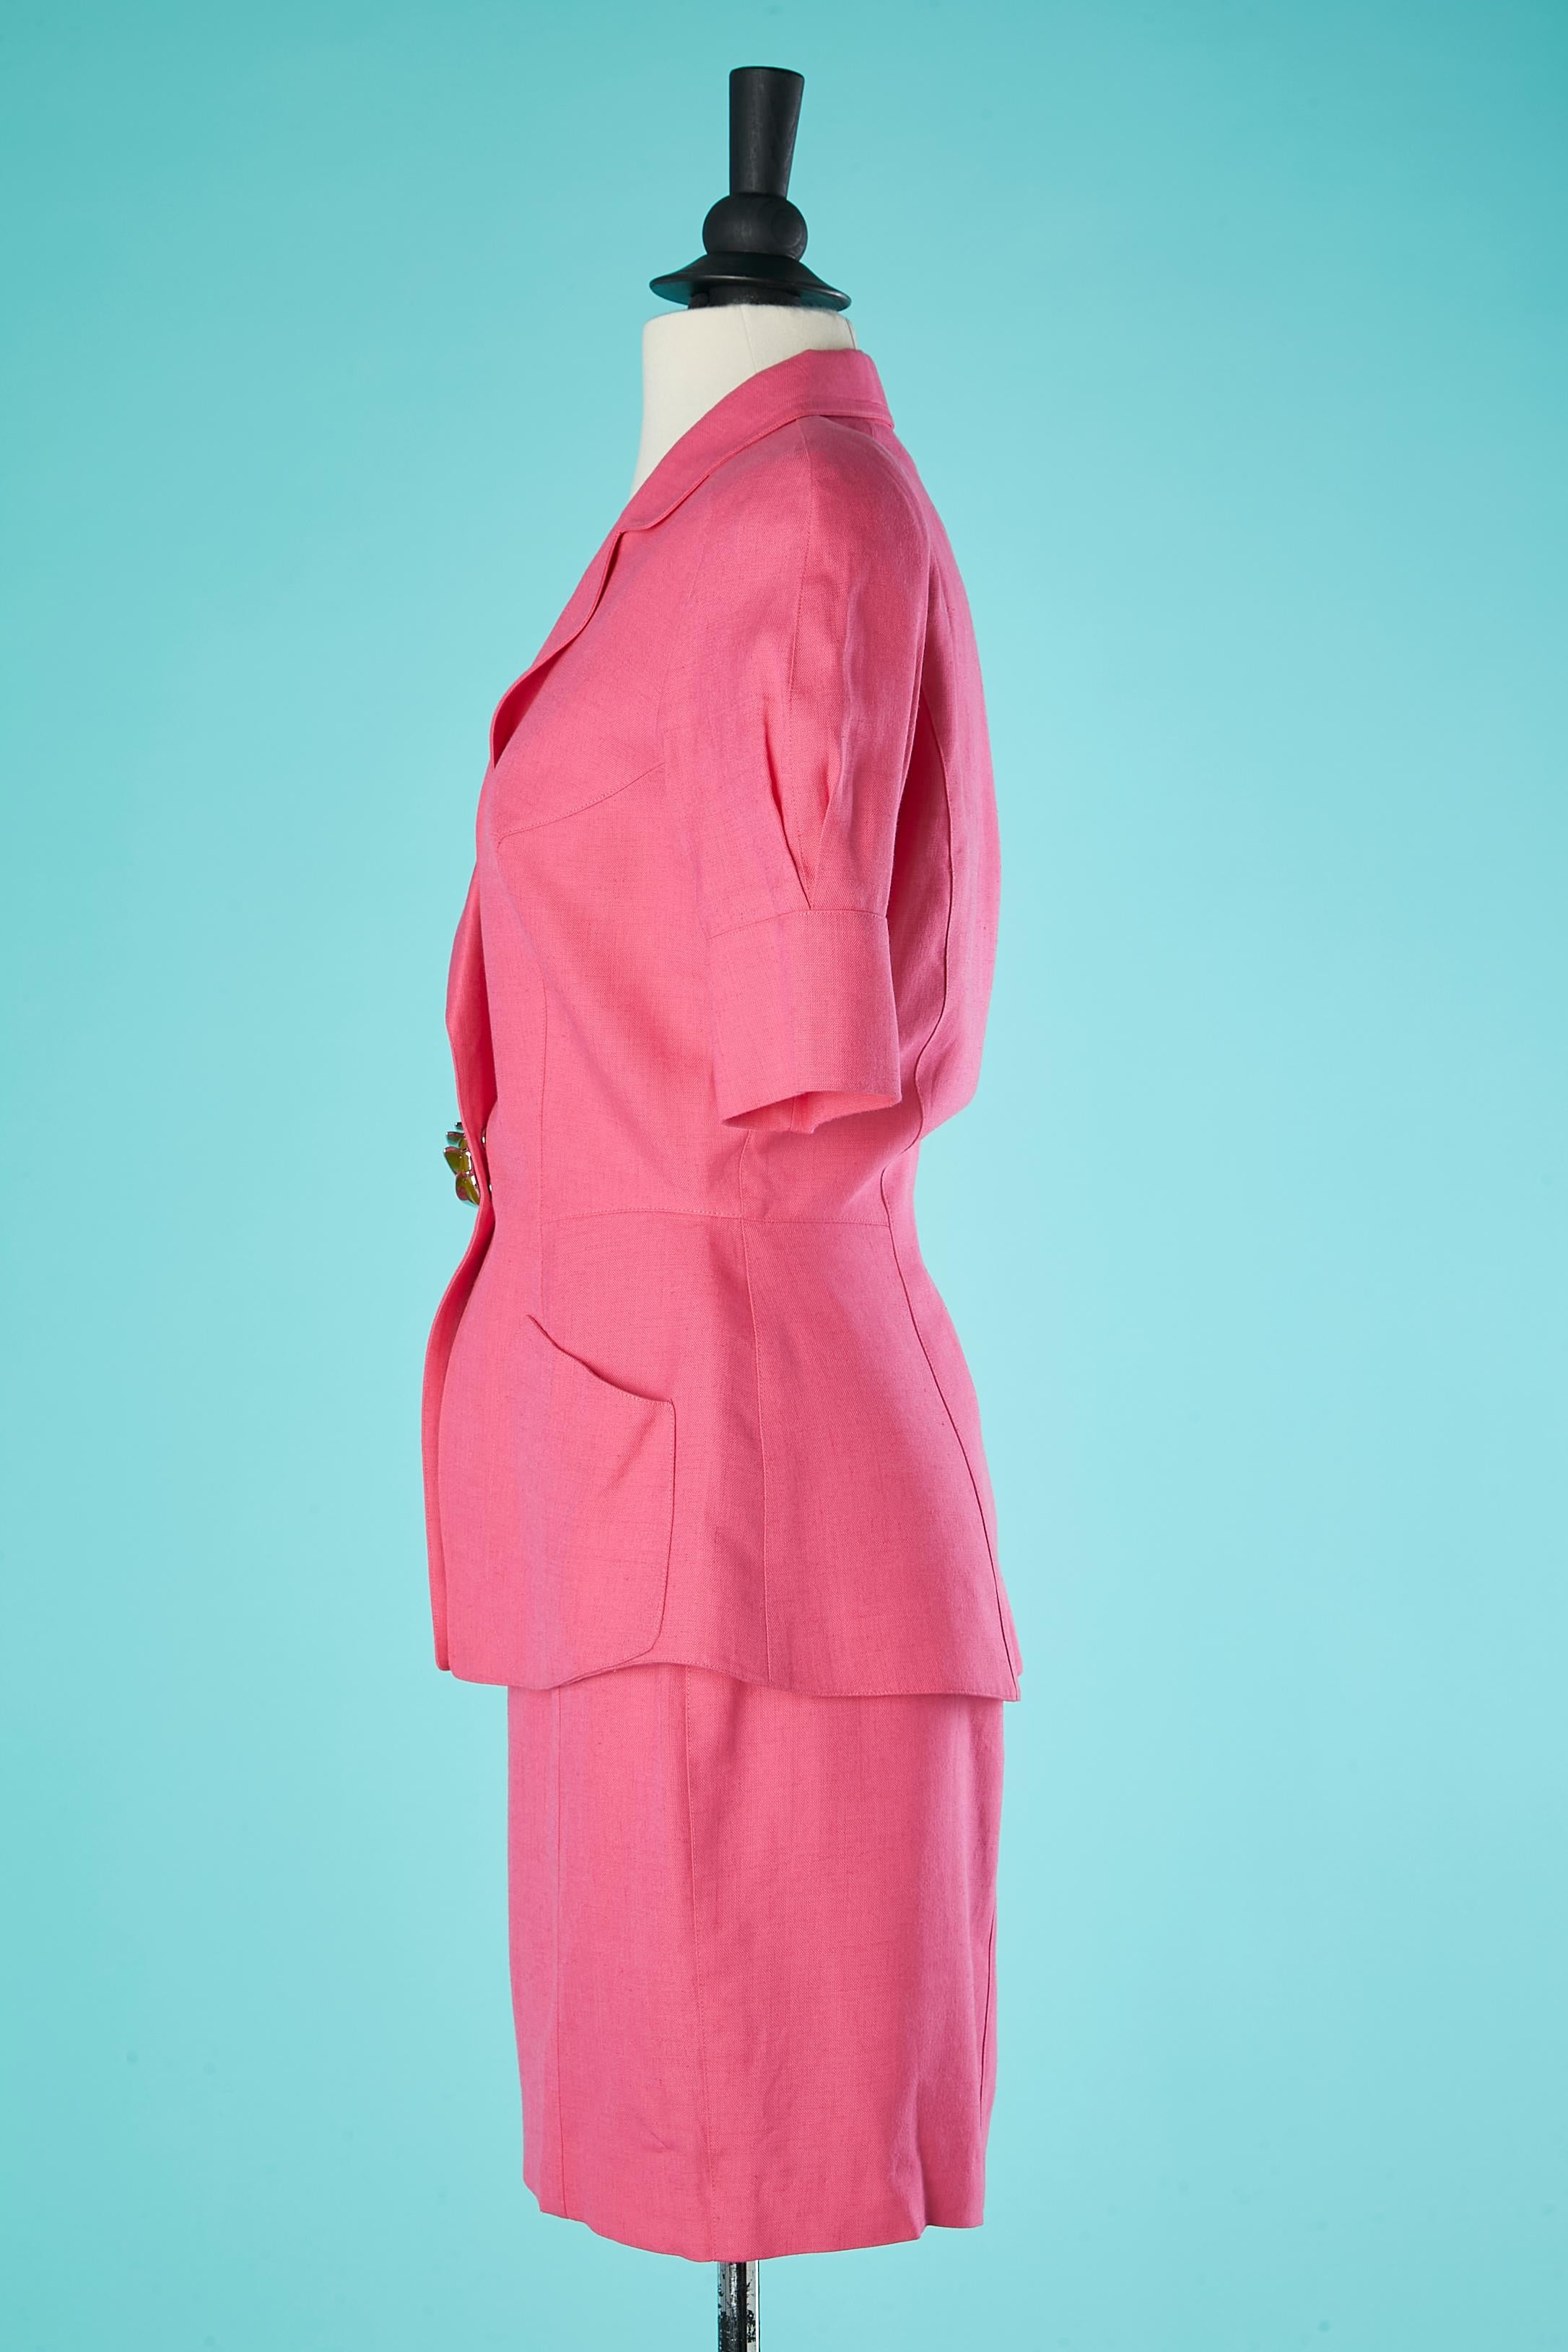 Pink skirt-suit with short sleeves and jewelery cabochon Thierry Mugler  For Sale 1